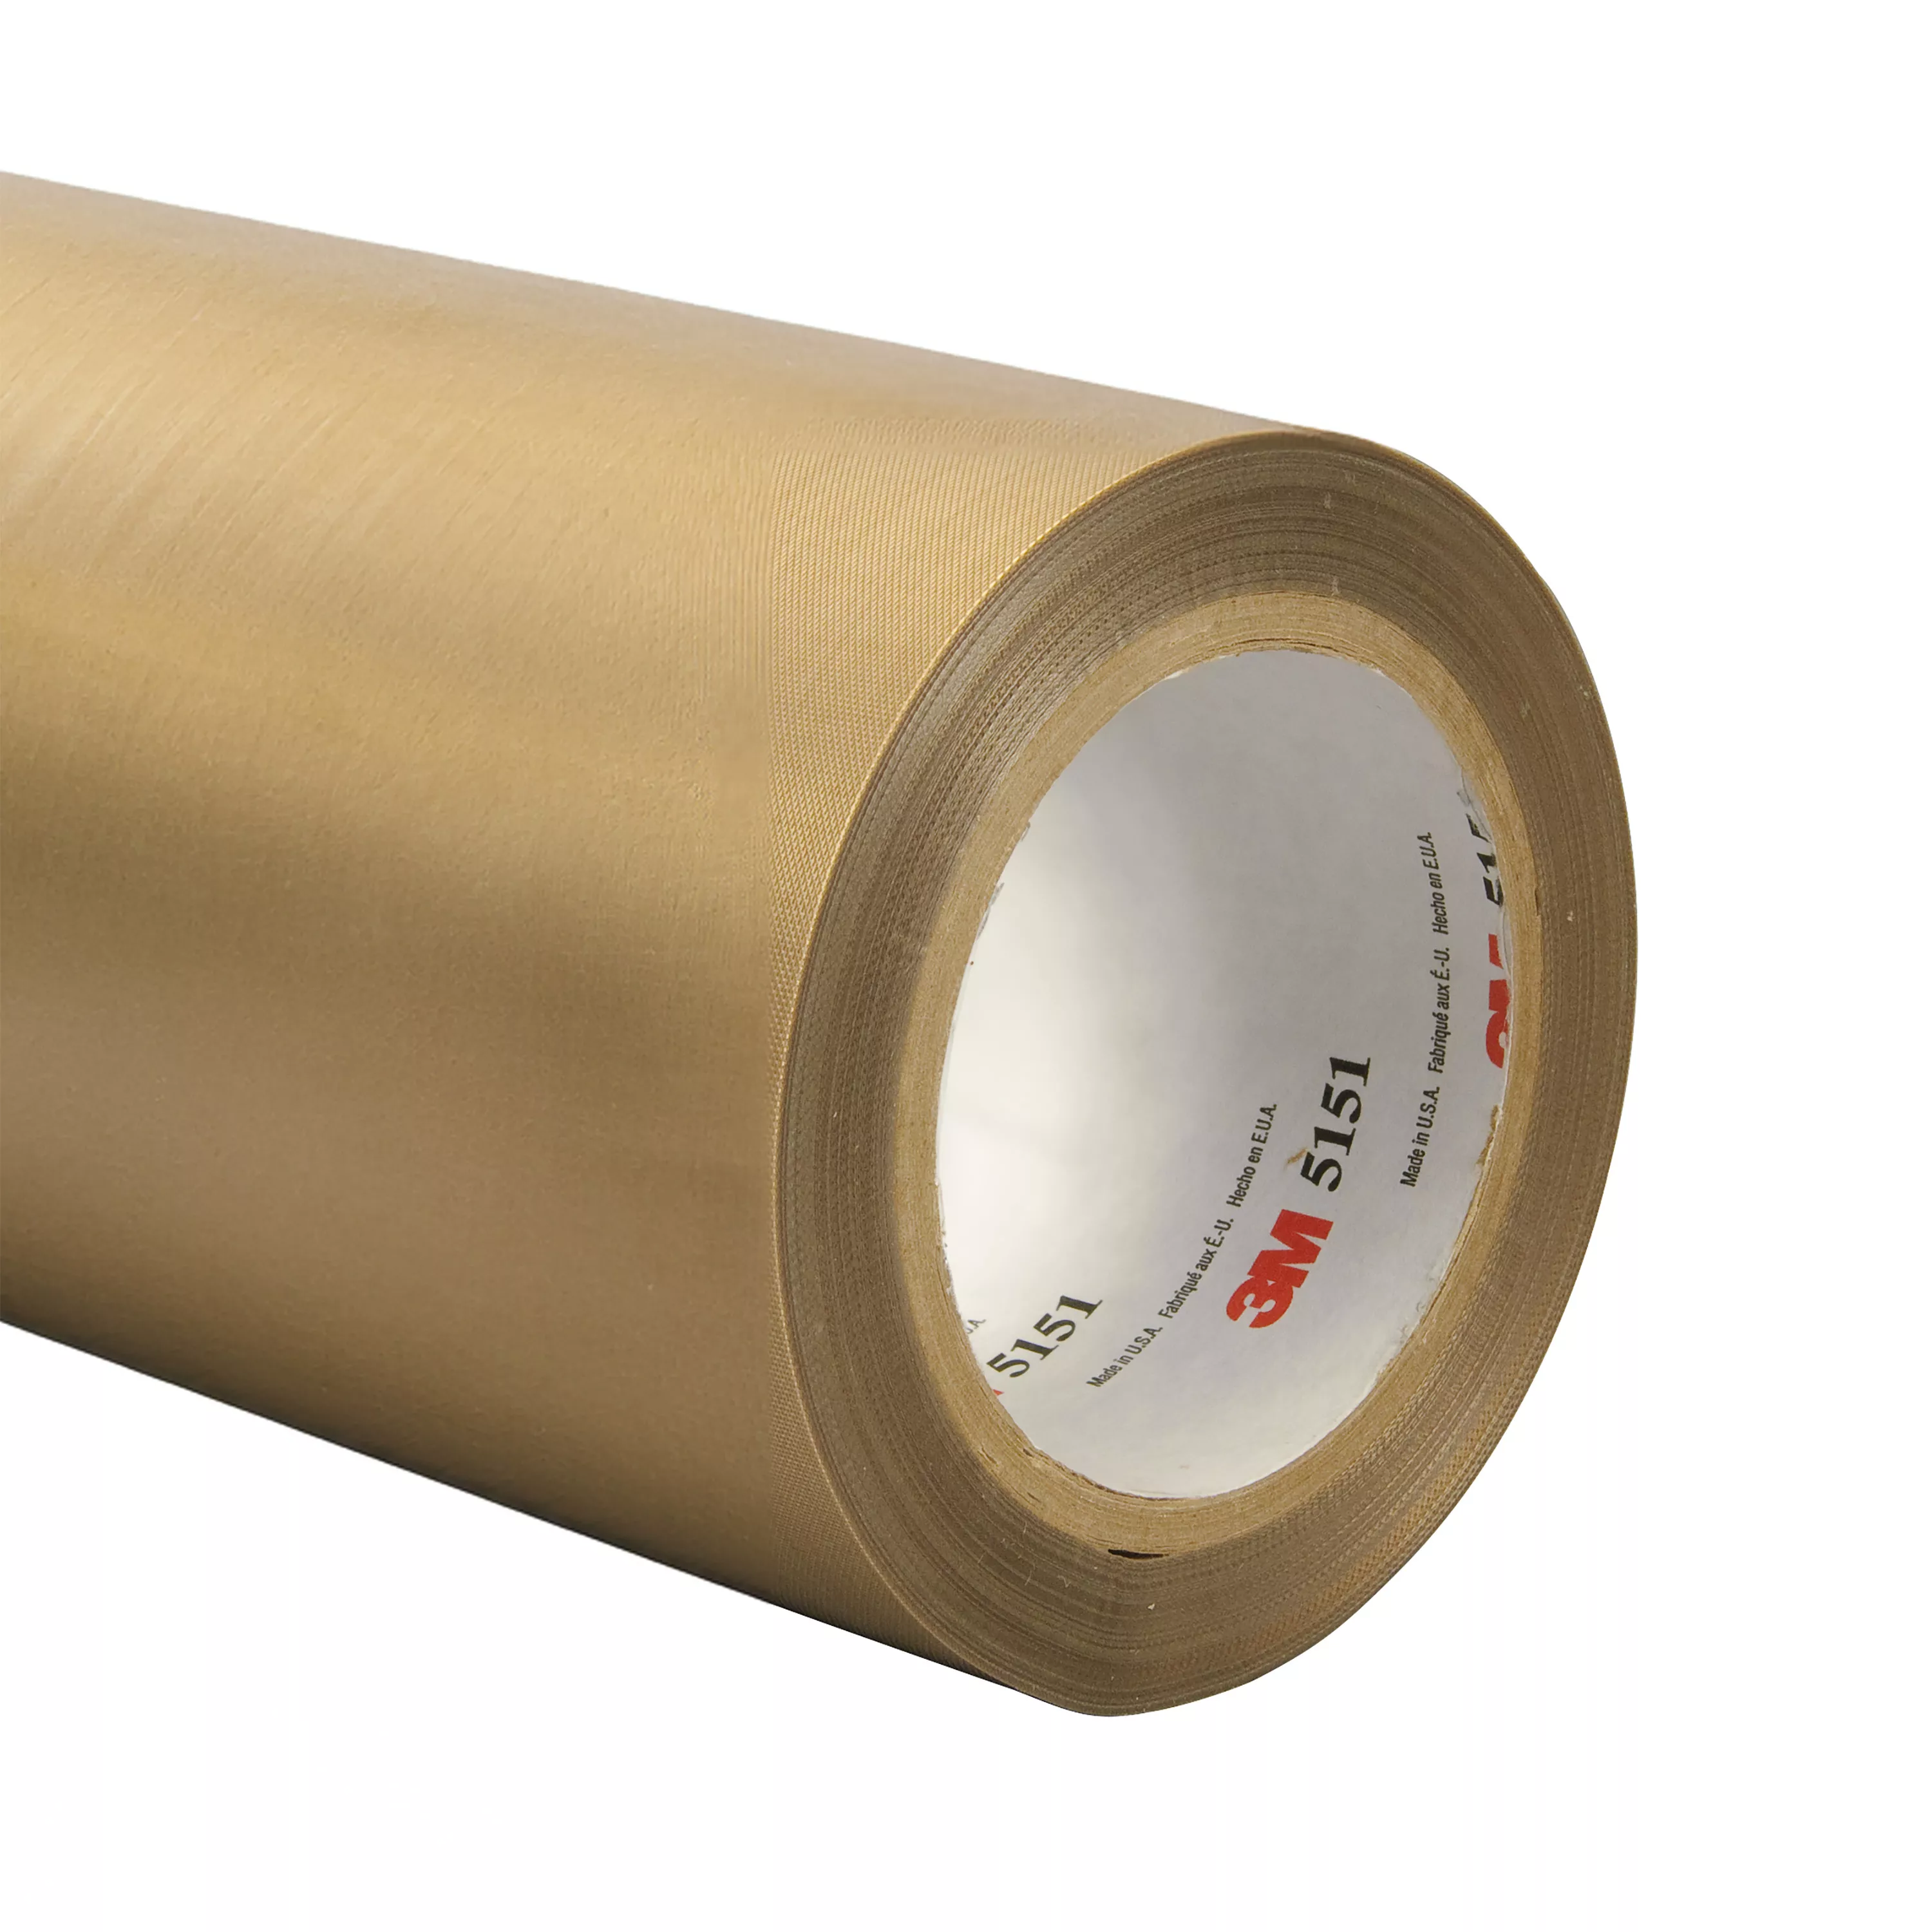 3M™ General Purpose PTFE Glass Cloth Tape 5151, Light Brown, 19 1/2 in x
36 yd, 5.3 mil, 2 Roll/Case